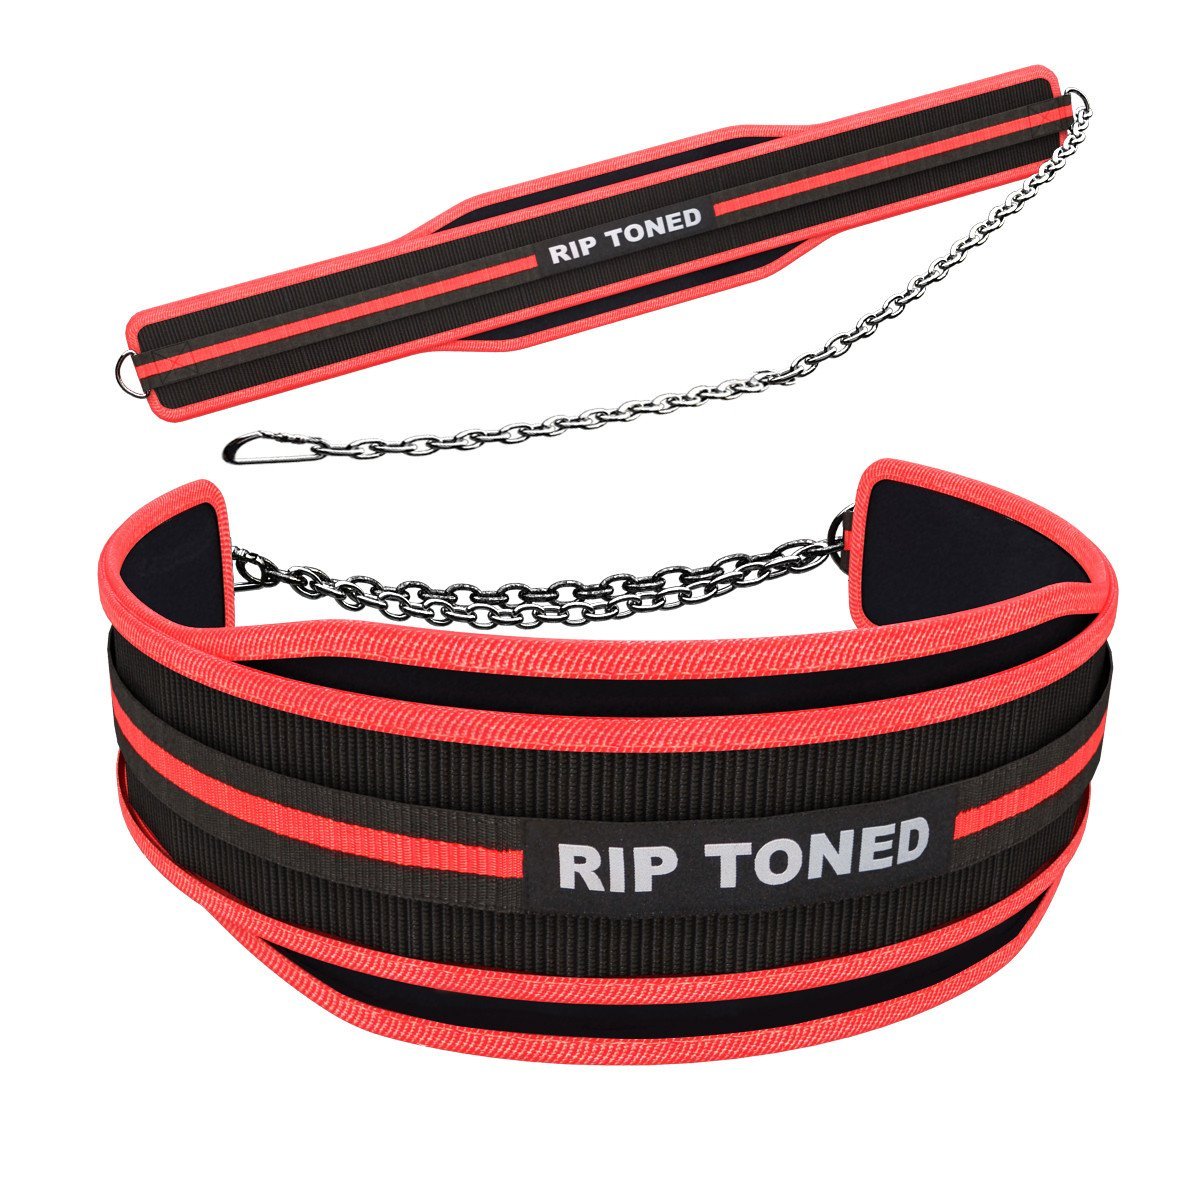 Rip Toned Dip Belt for Weight lifting, Pull Ups, Dips, Chin Ups - 36 Heavy  Duty Steel Chain - Weight Belt with Chain for Weight Lifting, Powerlifting,  and Strength Training, Weight Lifting